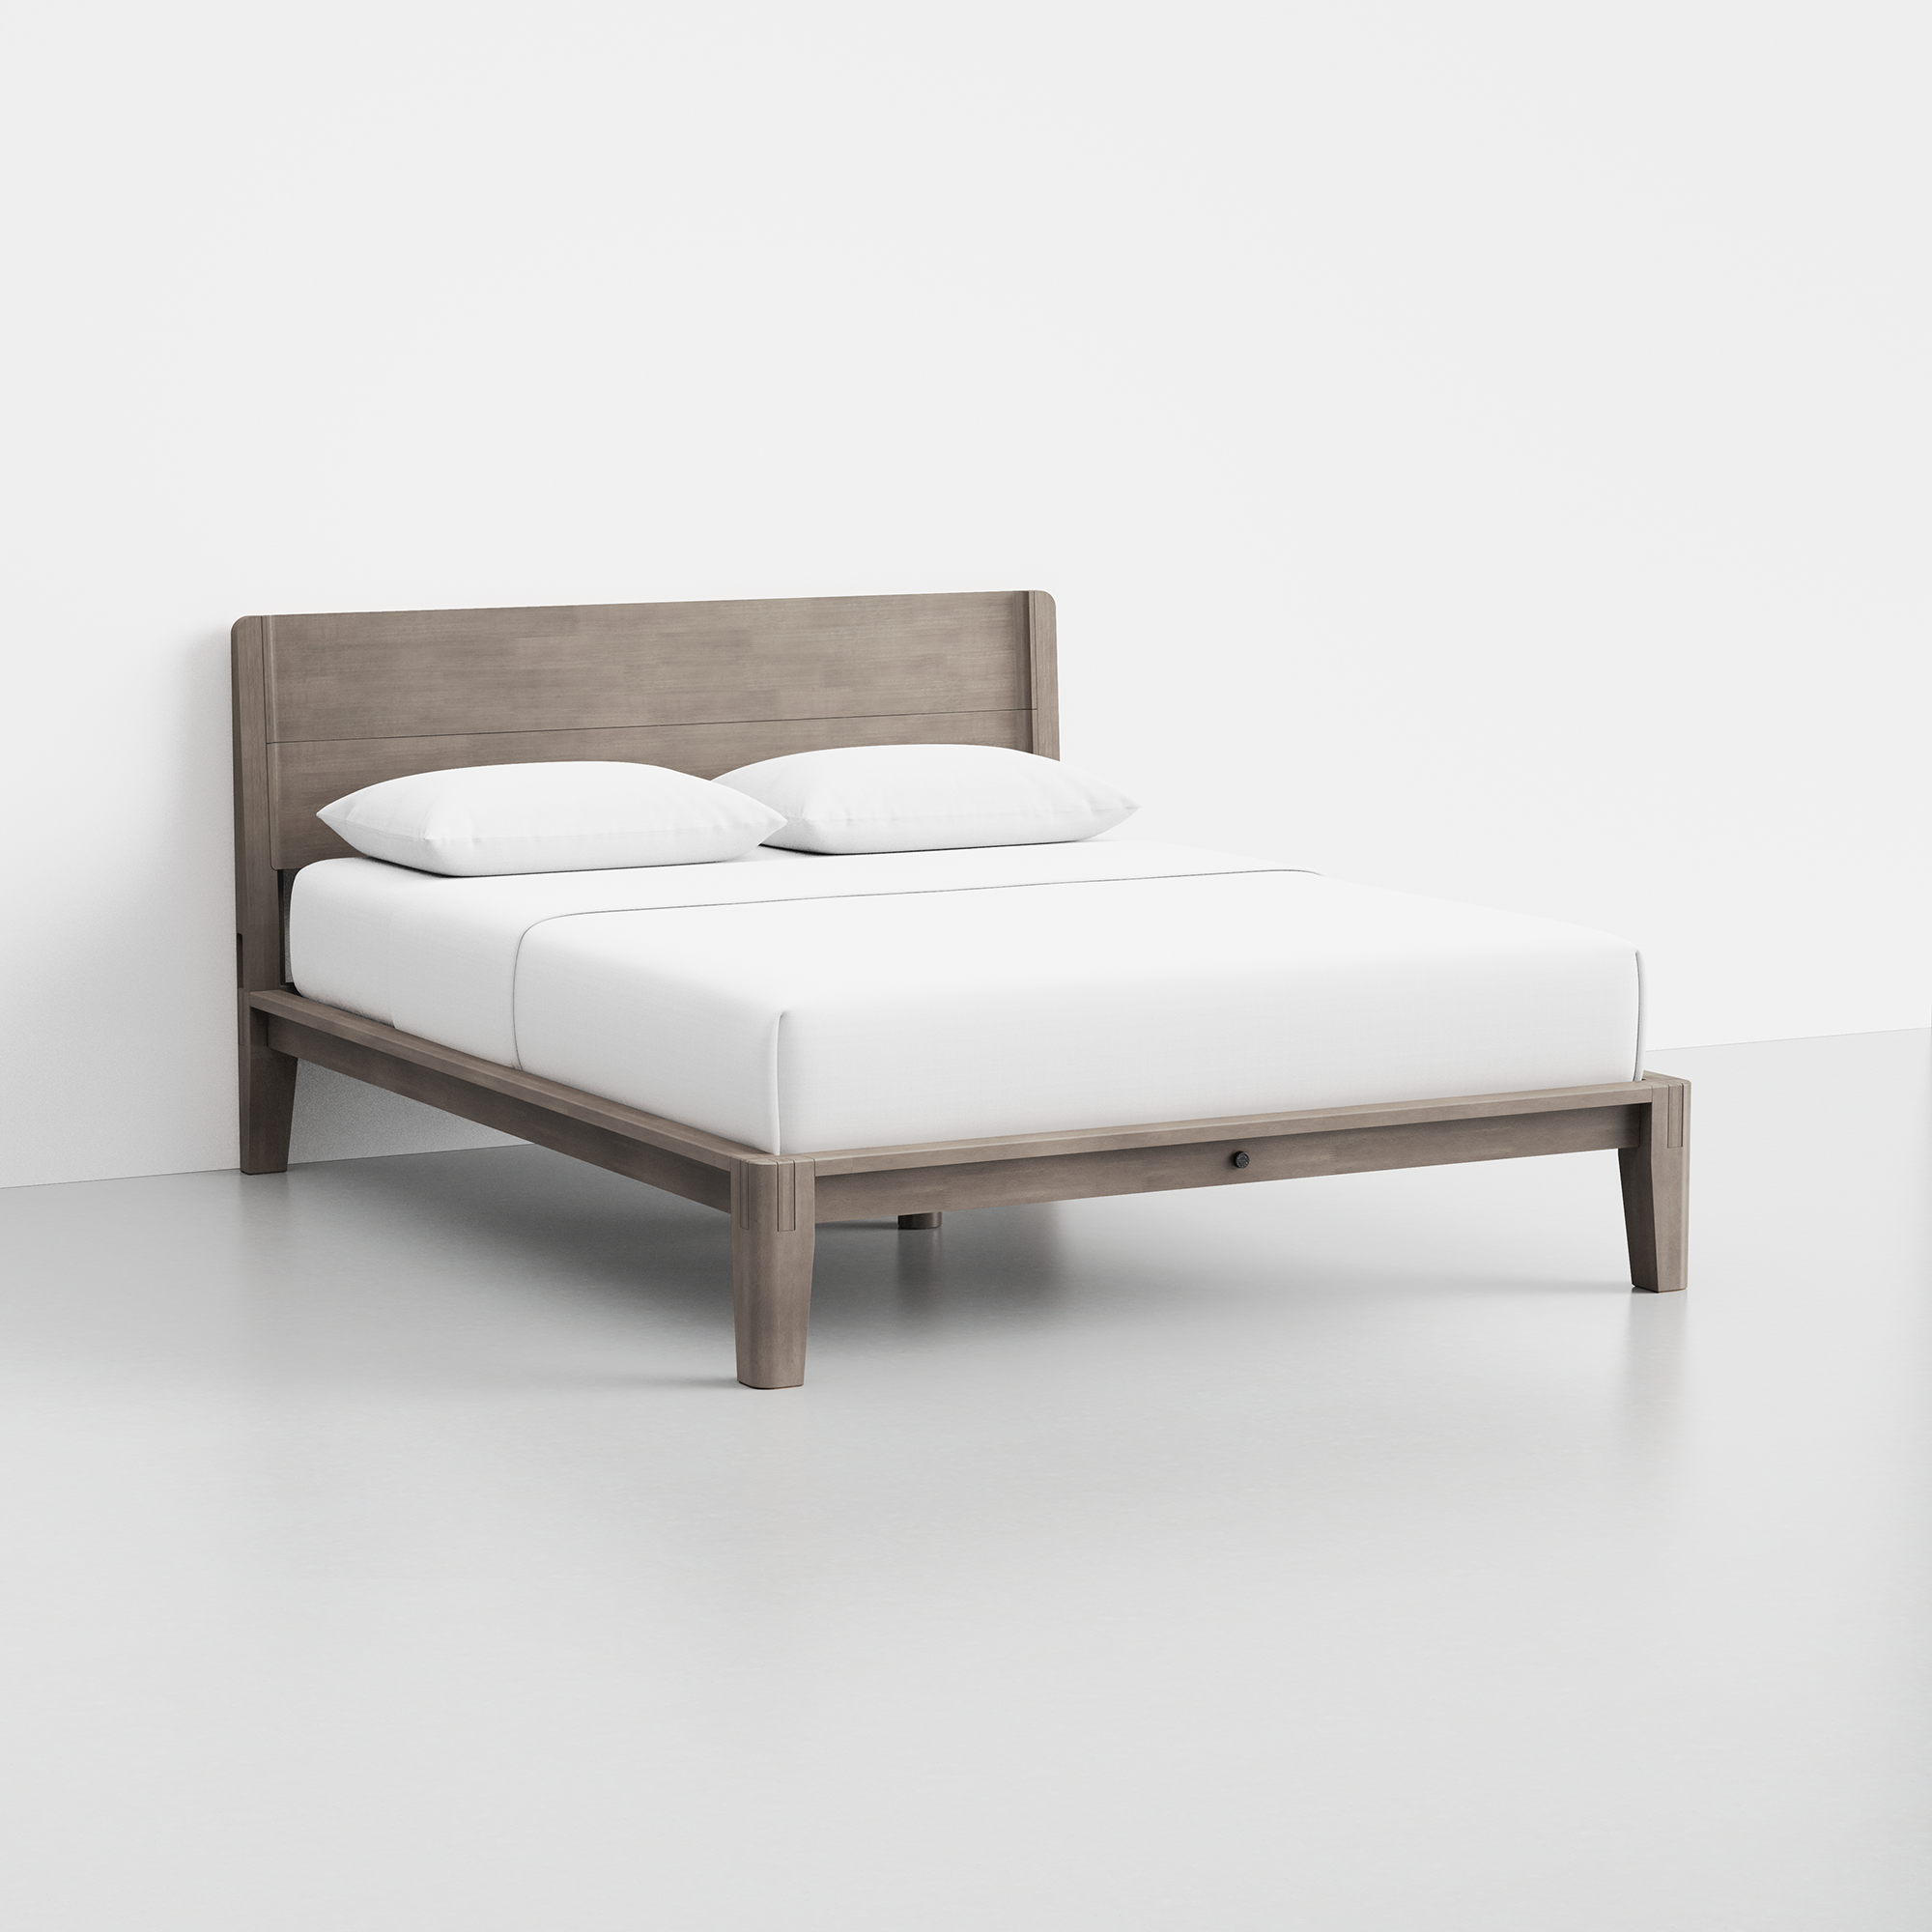 The Bed (Grey / Headboard) - Render - Angled